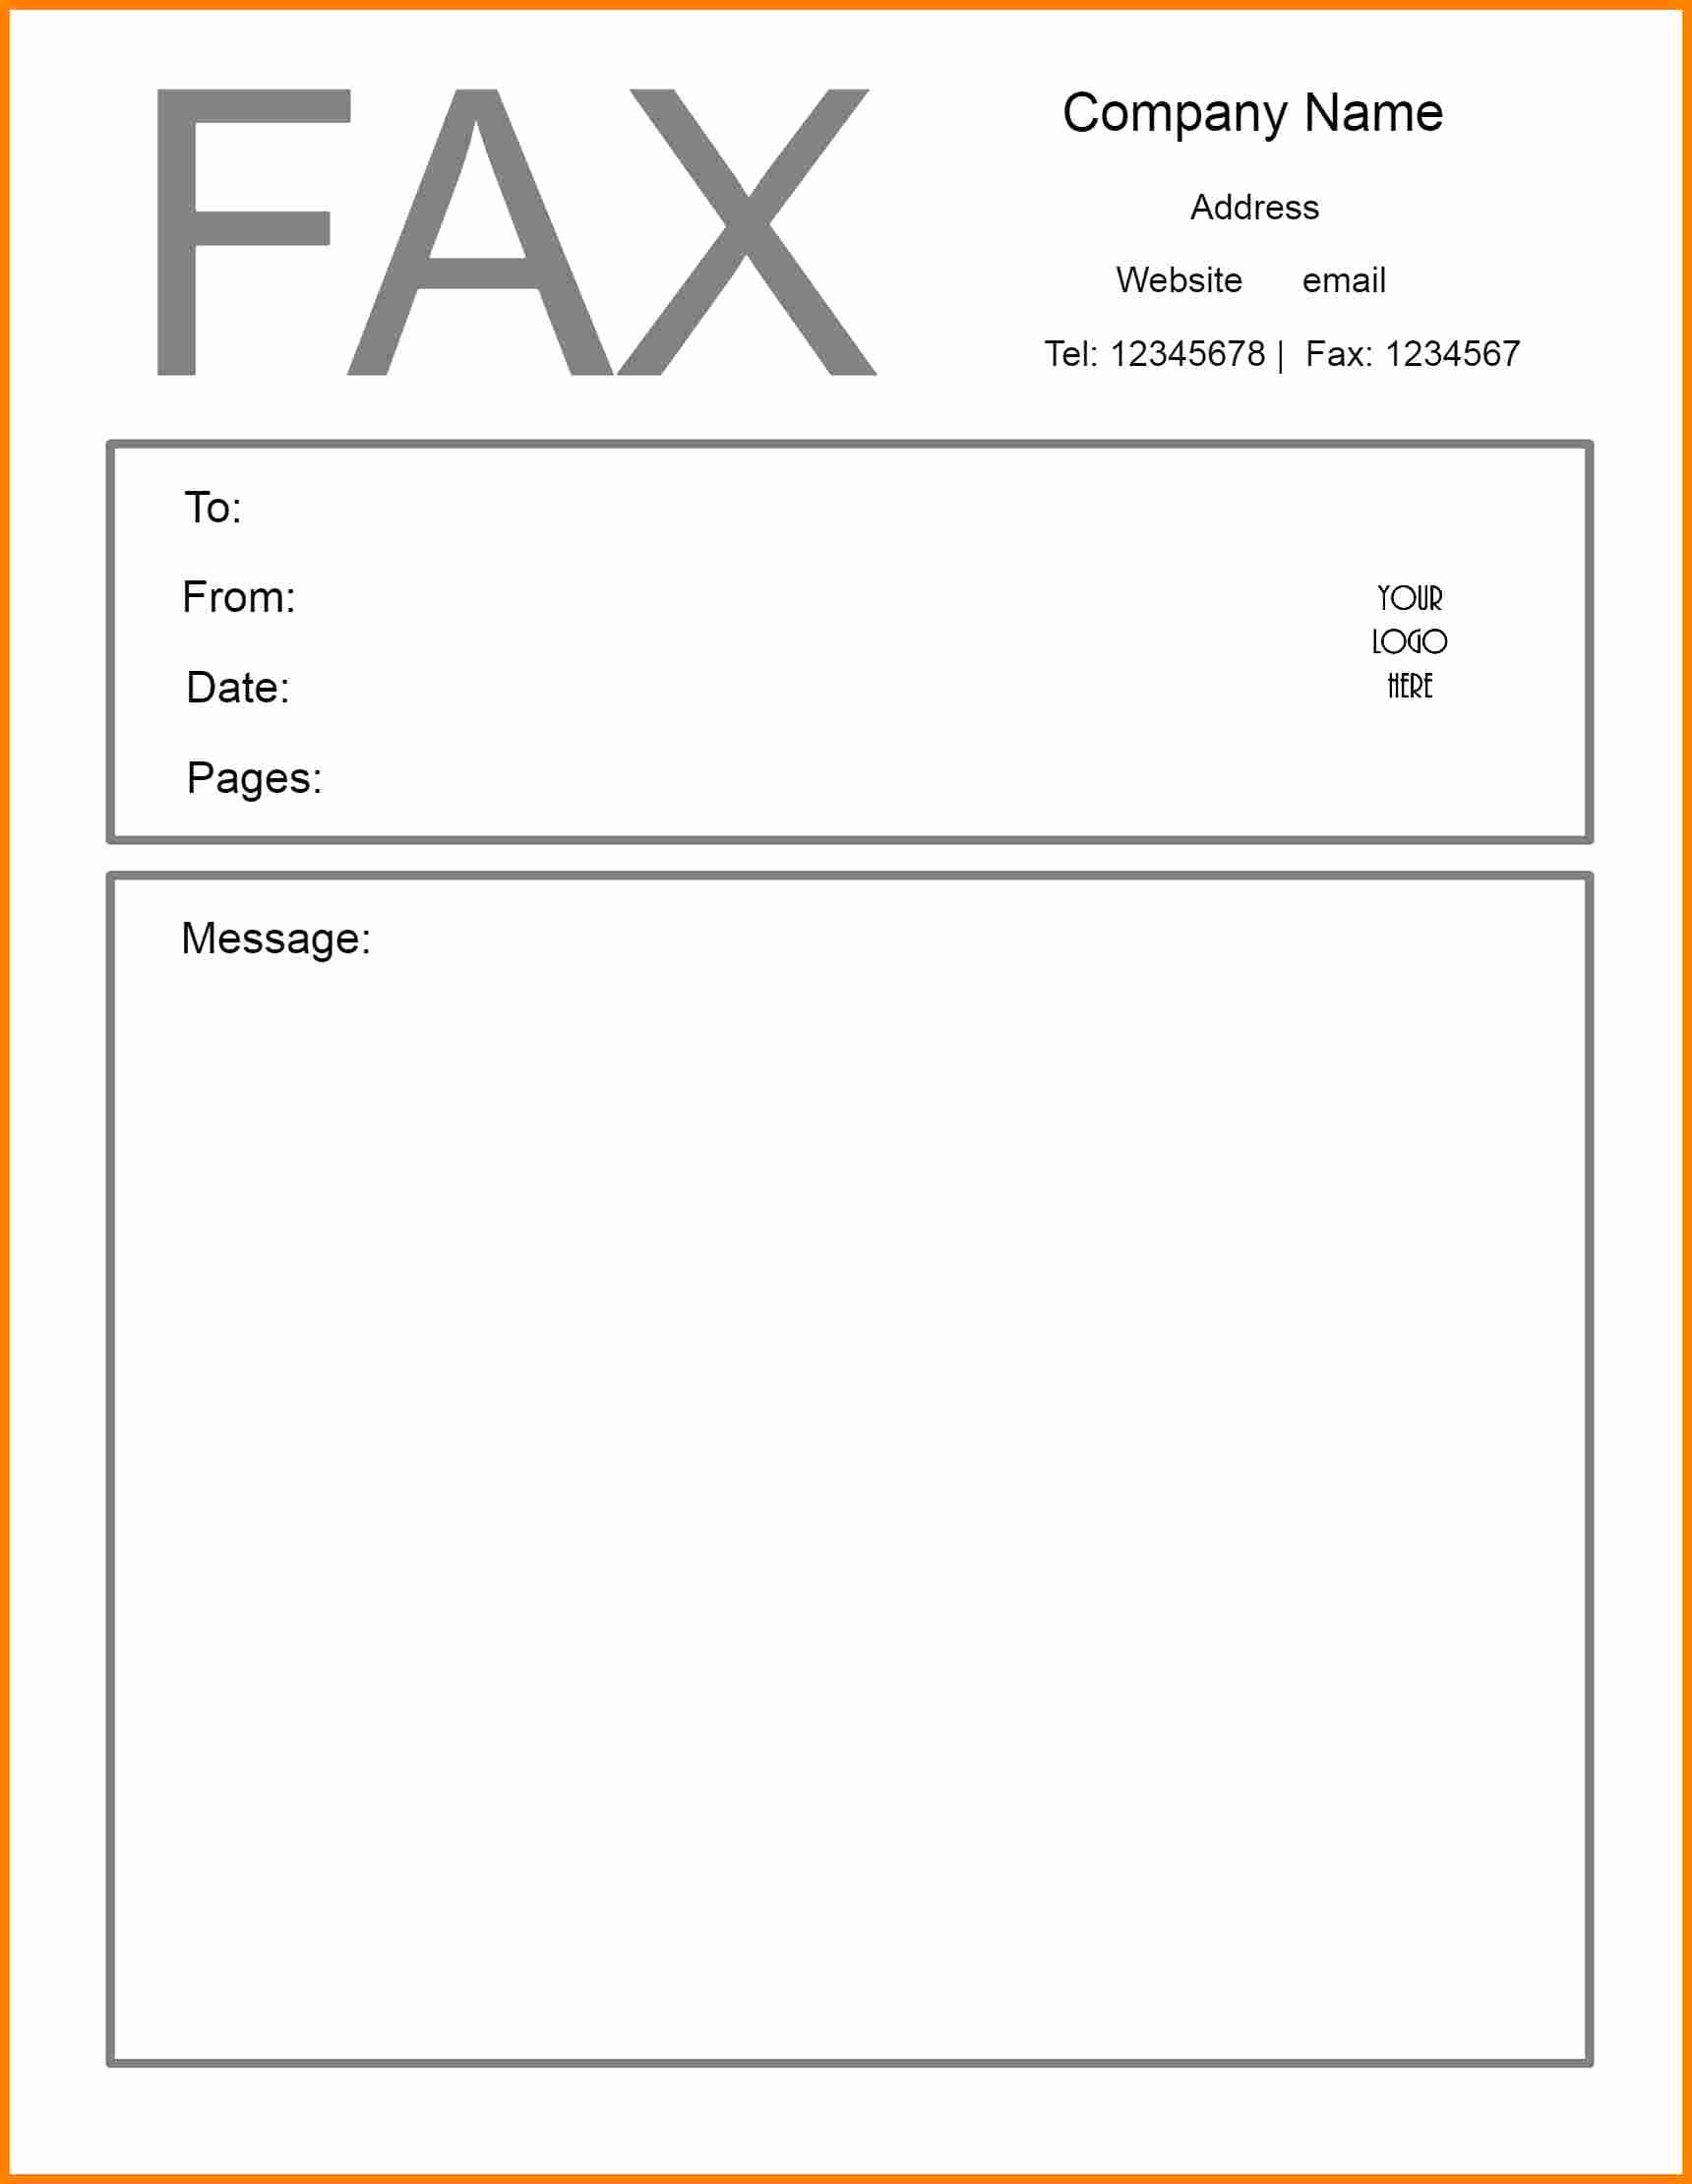 Print A Fax Cover Sheet Fresh Fax Cover Sheet 11 Free Pro Templates You Can Use Right